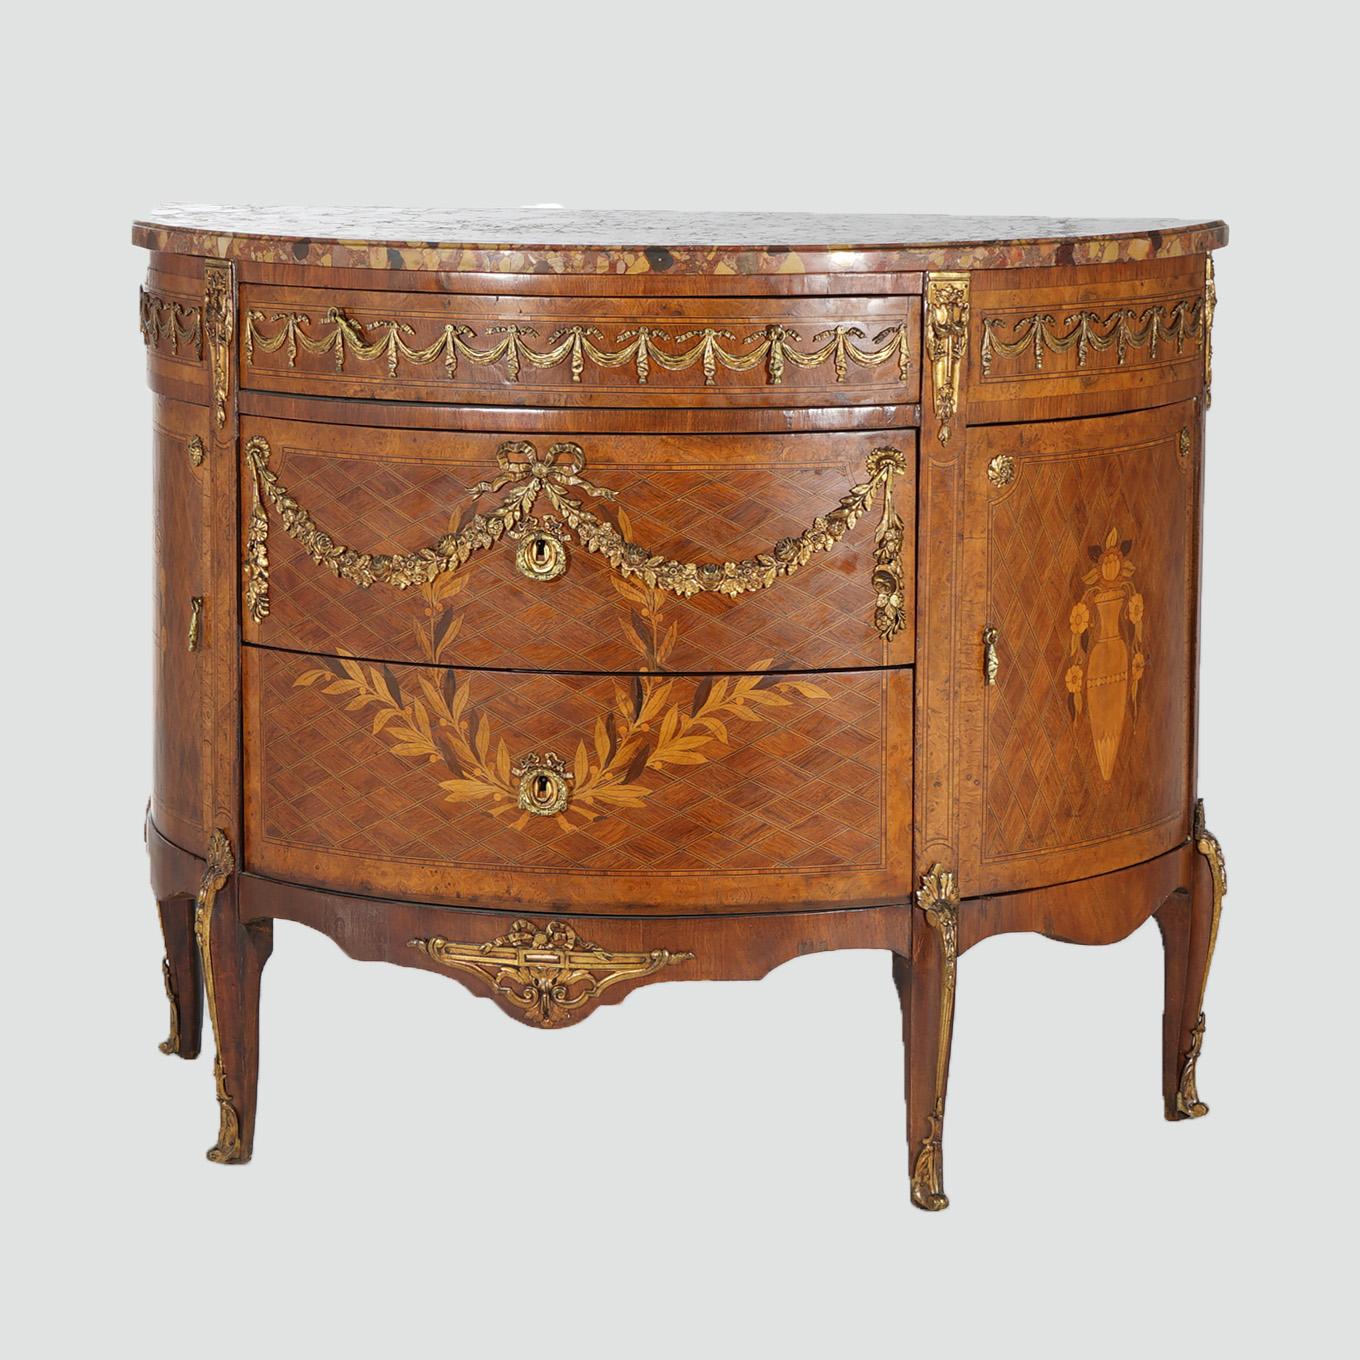 ***Ask About Lower In-House Shipping Rates - Reliable Service, Competitive Rates & Fully Insured***

An antique French Louis XVI E Blanchet console offers specimen marble top over kingwood base in demilune form and having satinwood marquetry wreath,